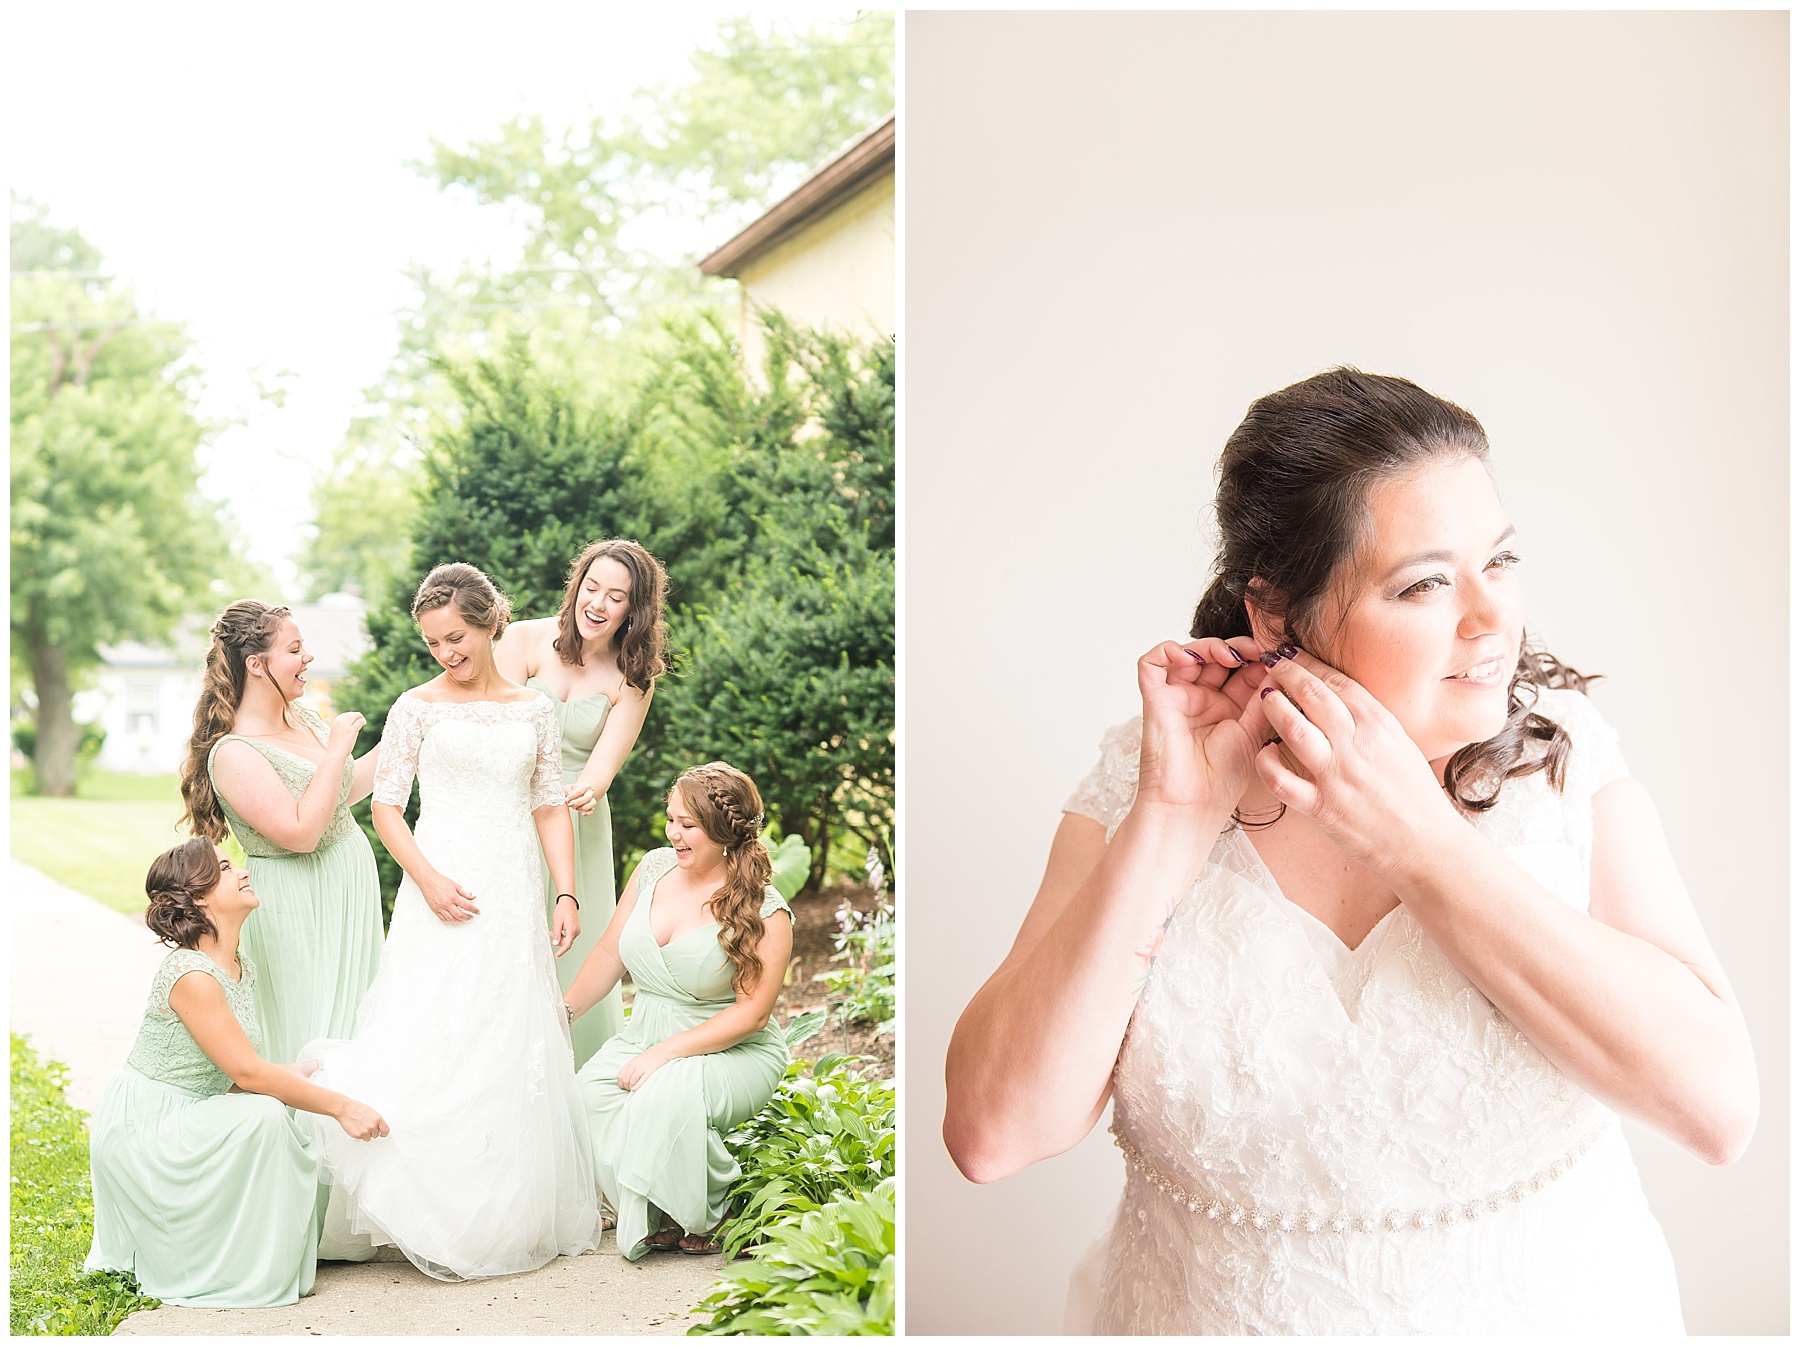 Bride in lace wedding dress putting in earrings in the 2018 wedding photography favorites. Bride surrounded by bridesmaids in sage green bridesmaid dresses in 2018 wedding photography favorites.